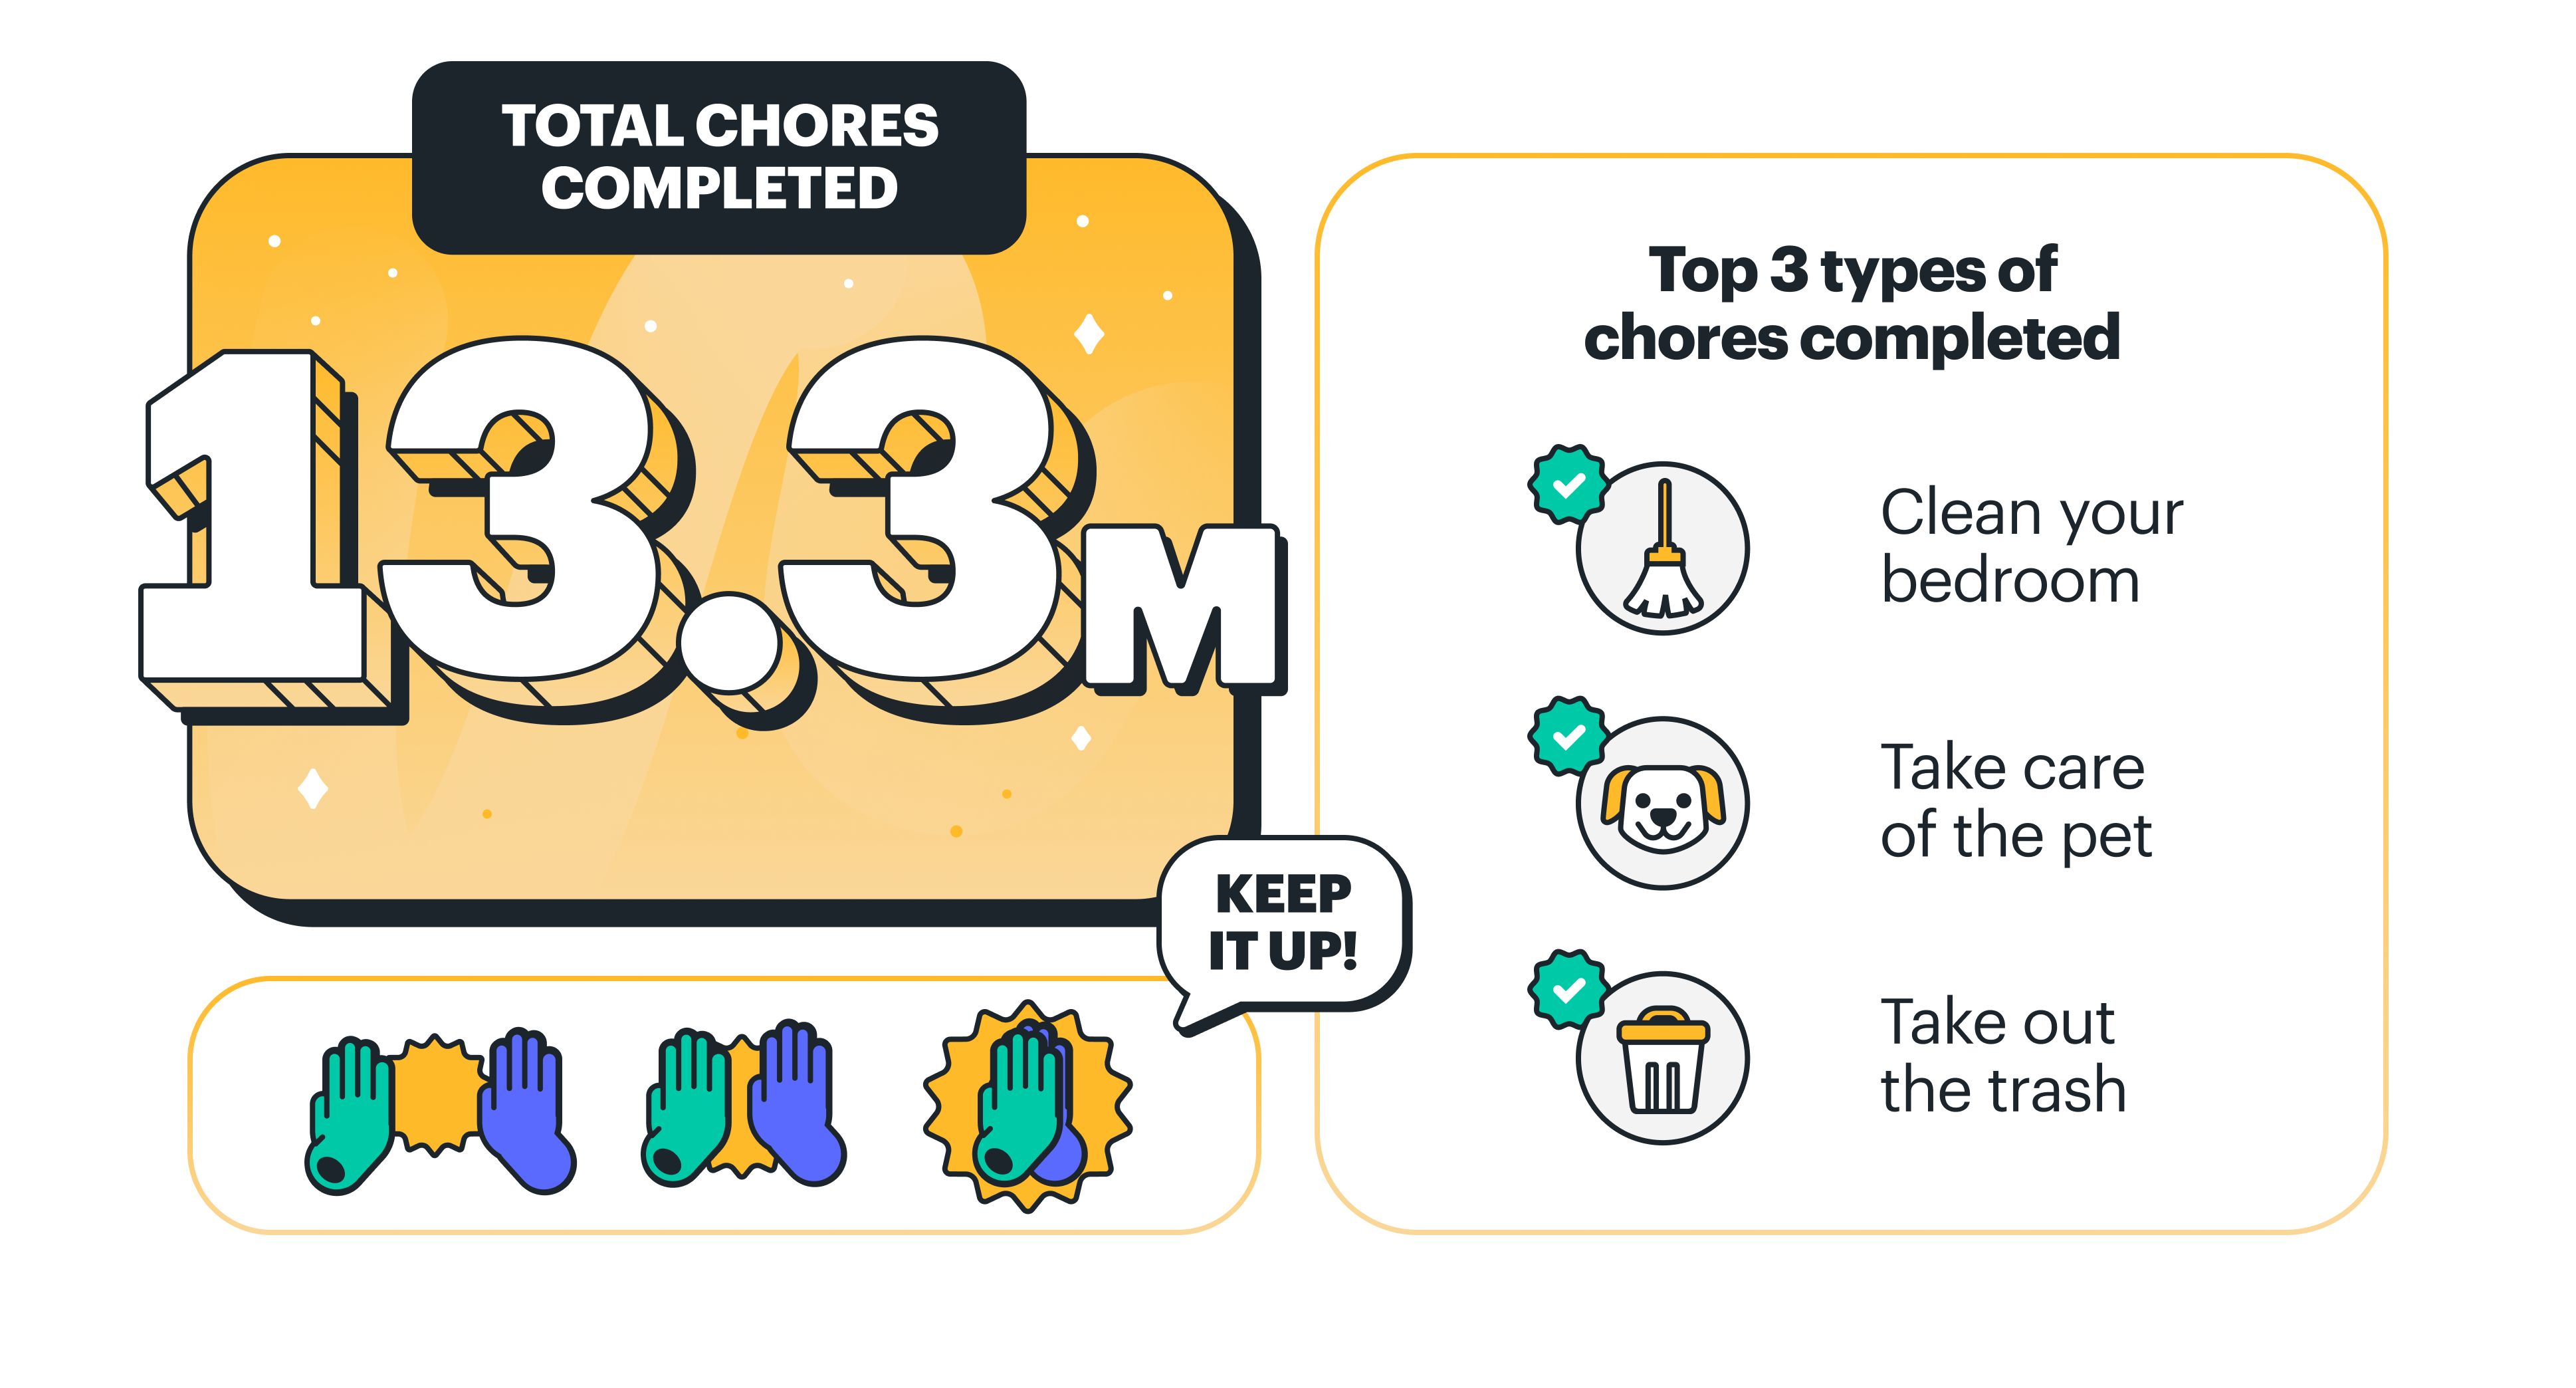 Greenlight 2022 review. 13.3 million chores completed, top 3 chores were related to household